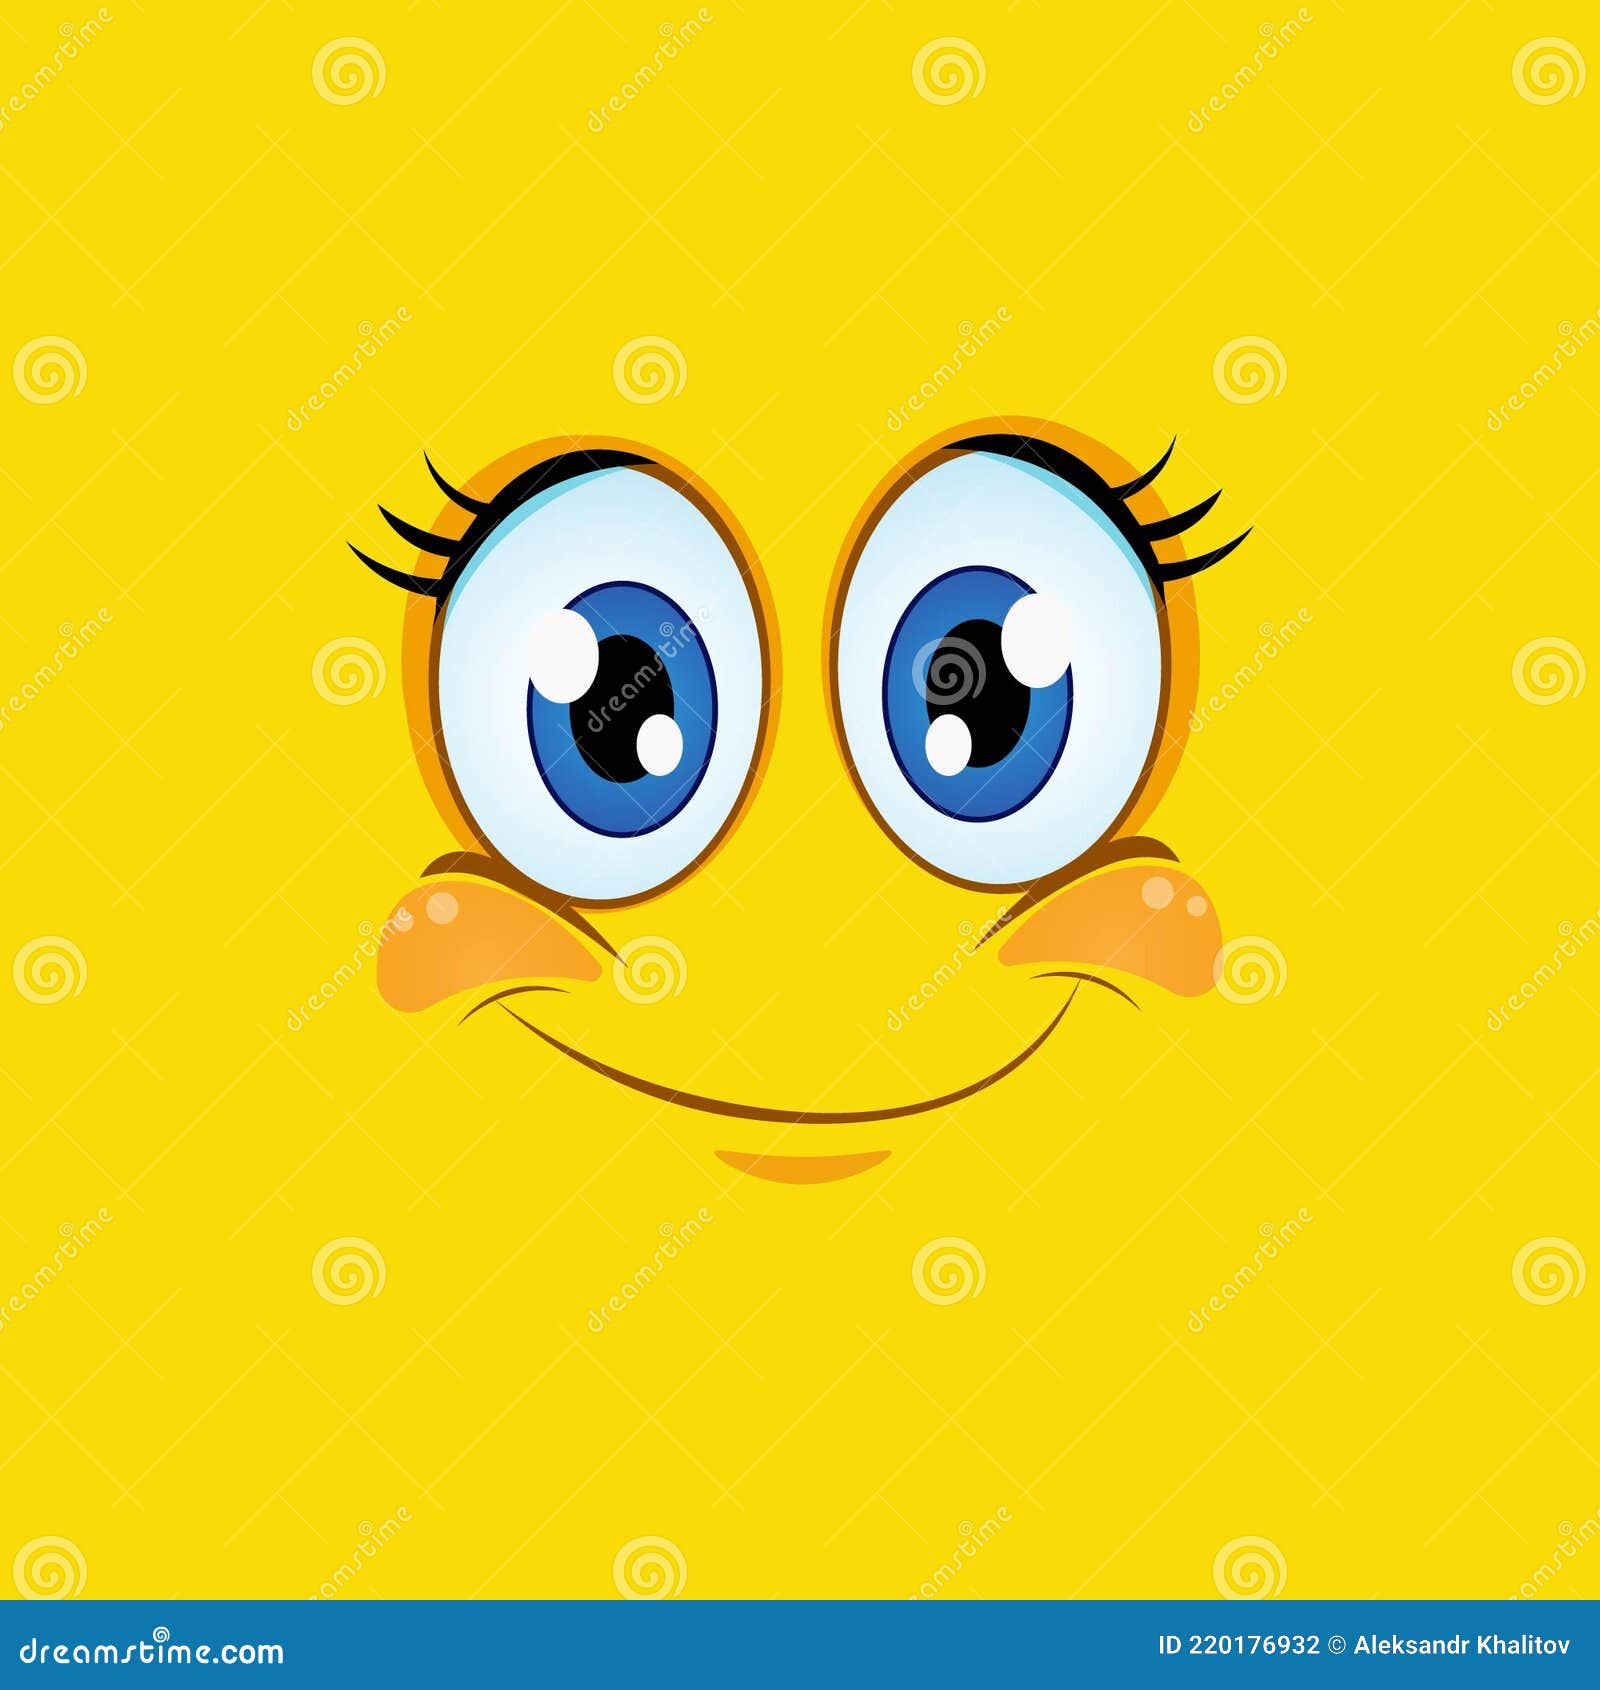 Cartoon Smile Icon Isolated on Yellow Background. Smiling Face Suitable for Cartoon  Character Mask Stock Vector - Illustration of happy, smile: 220176932